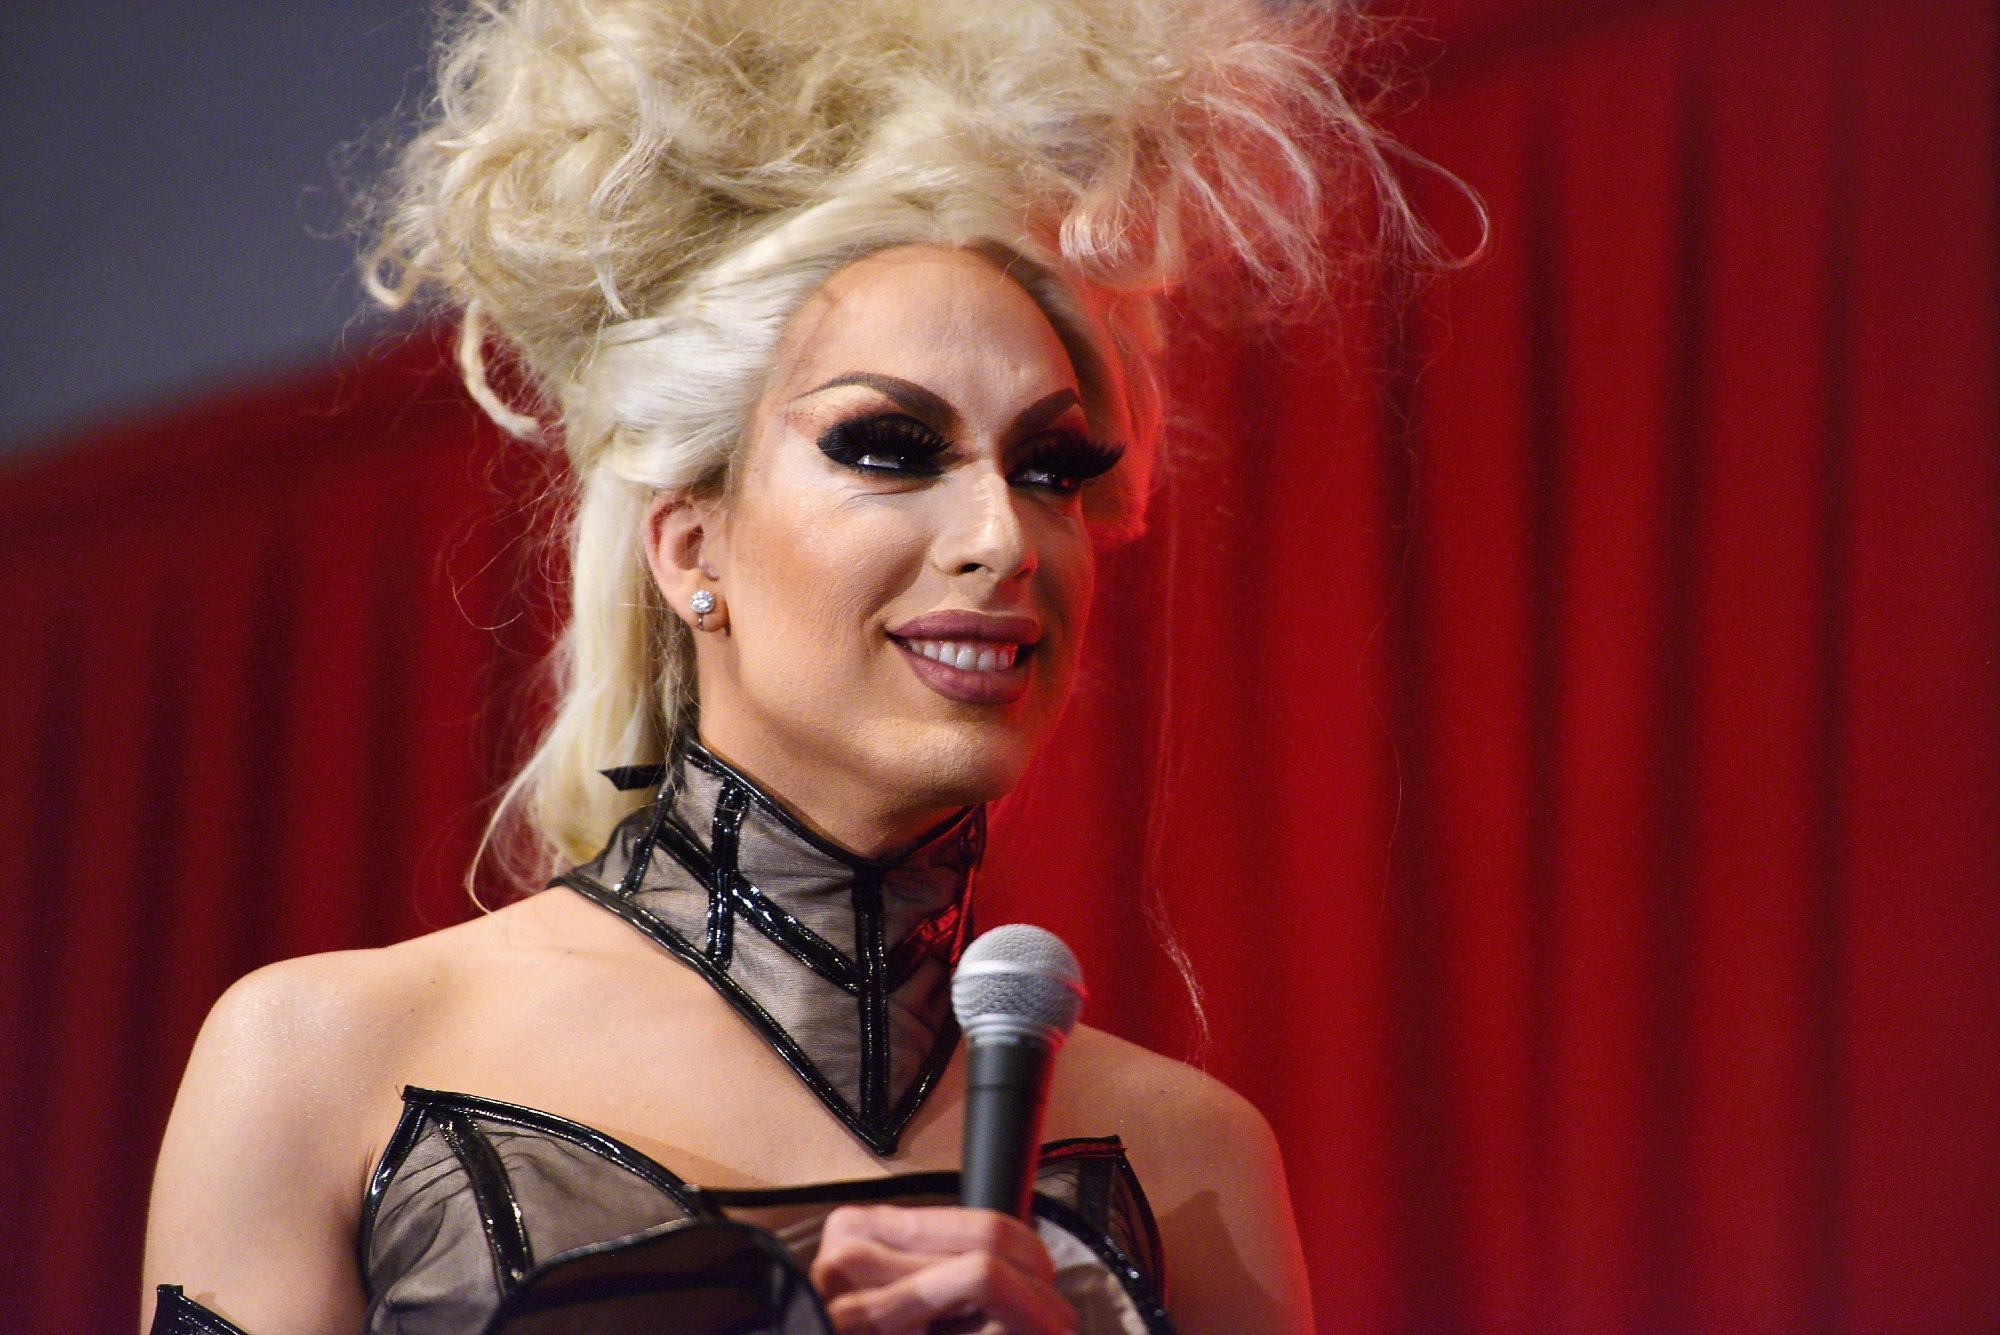 'RuPaul's Drag Race' Season 5 and All Stars 2 contestant Alaska on RuPaul smiling with blonde hair and a mic in hand